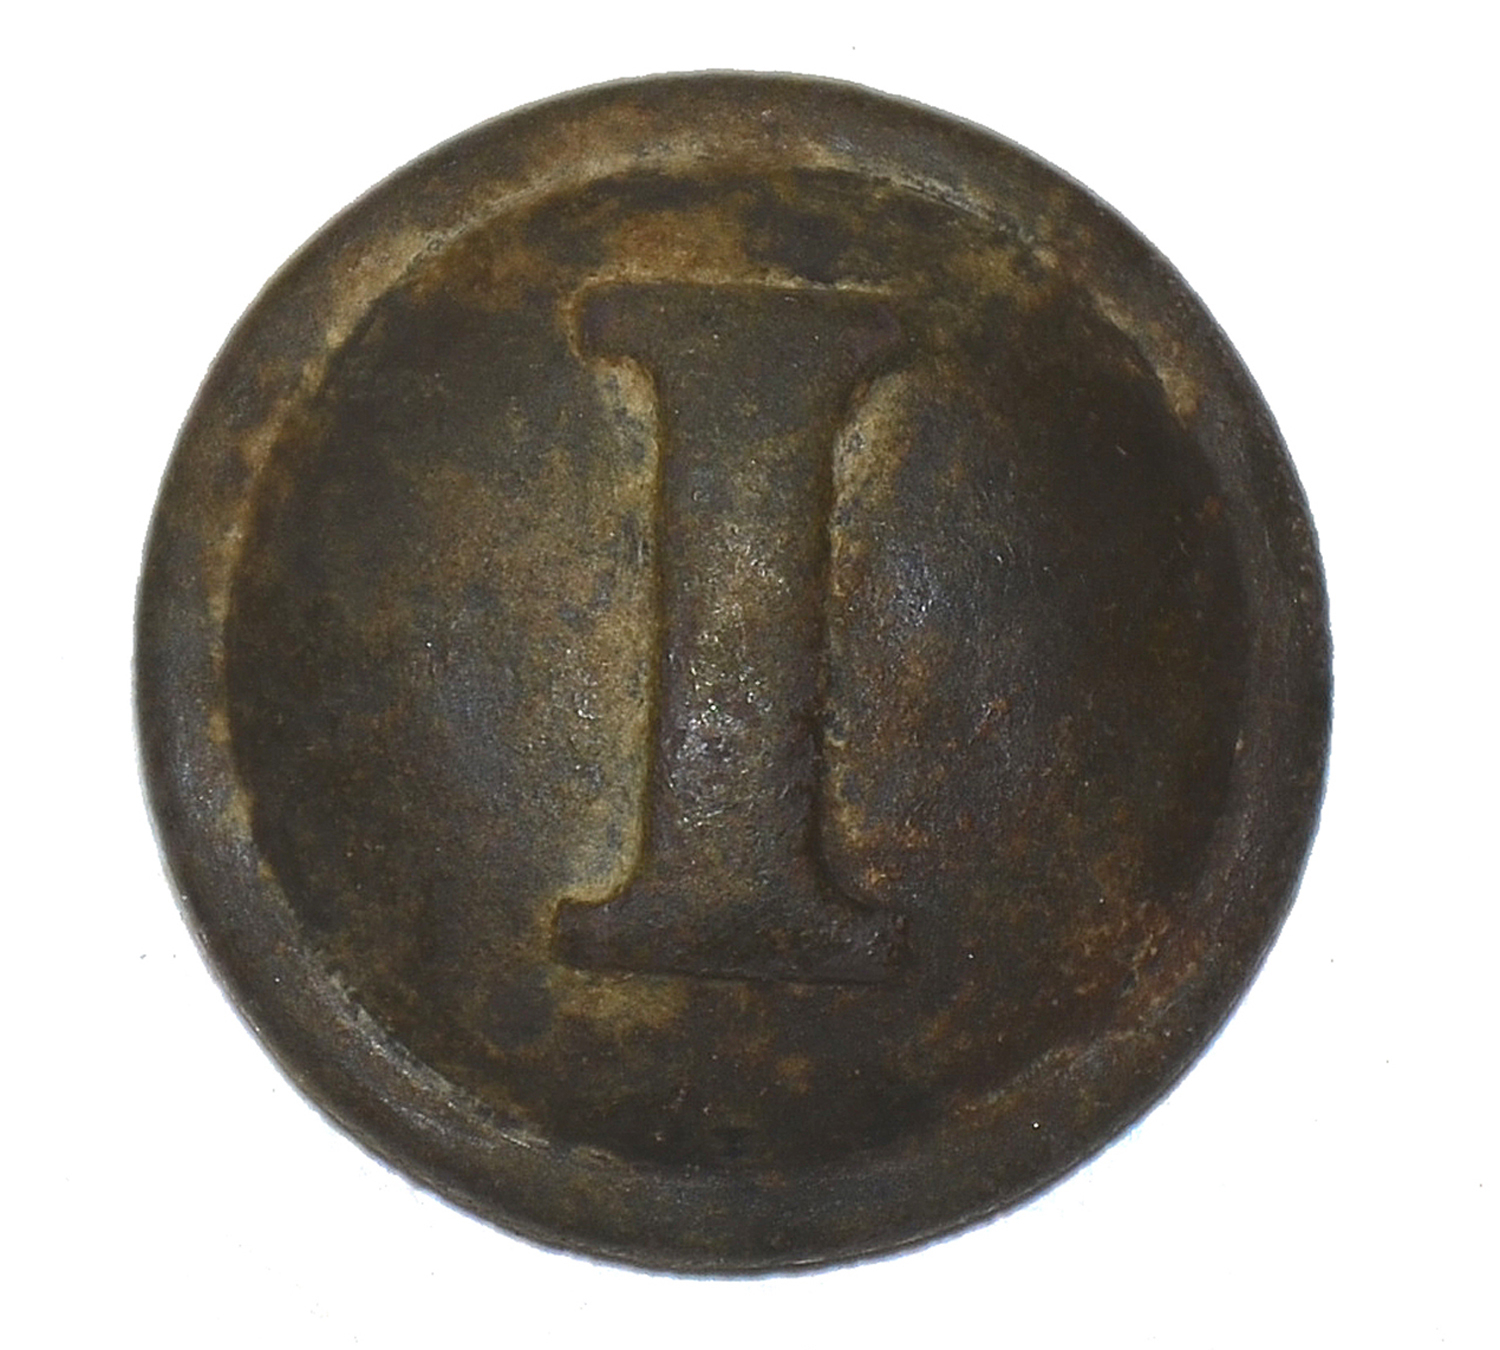 CONFEDERATE INFANTRY “I” BUTTON RECOVERED AT THE HISTORIC ROSE FARM AT GETTYSBURG